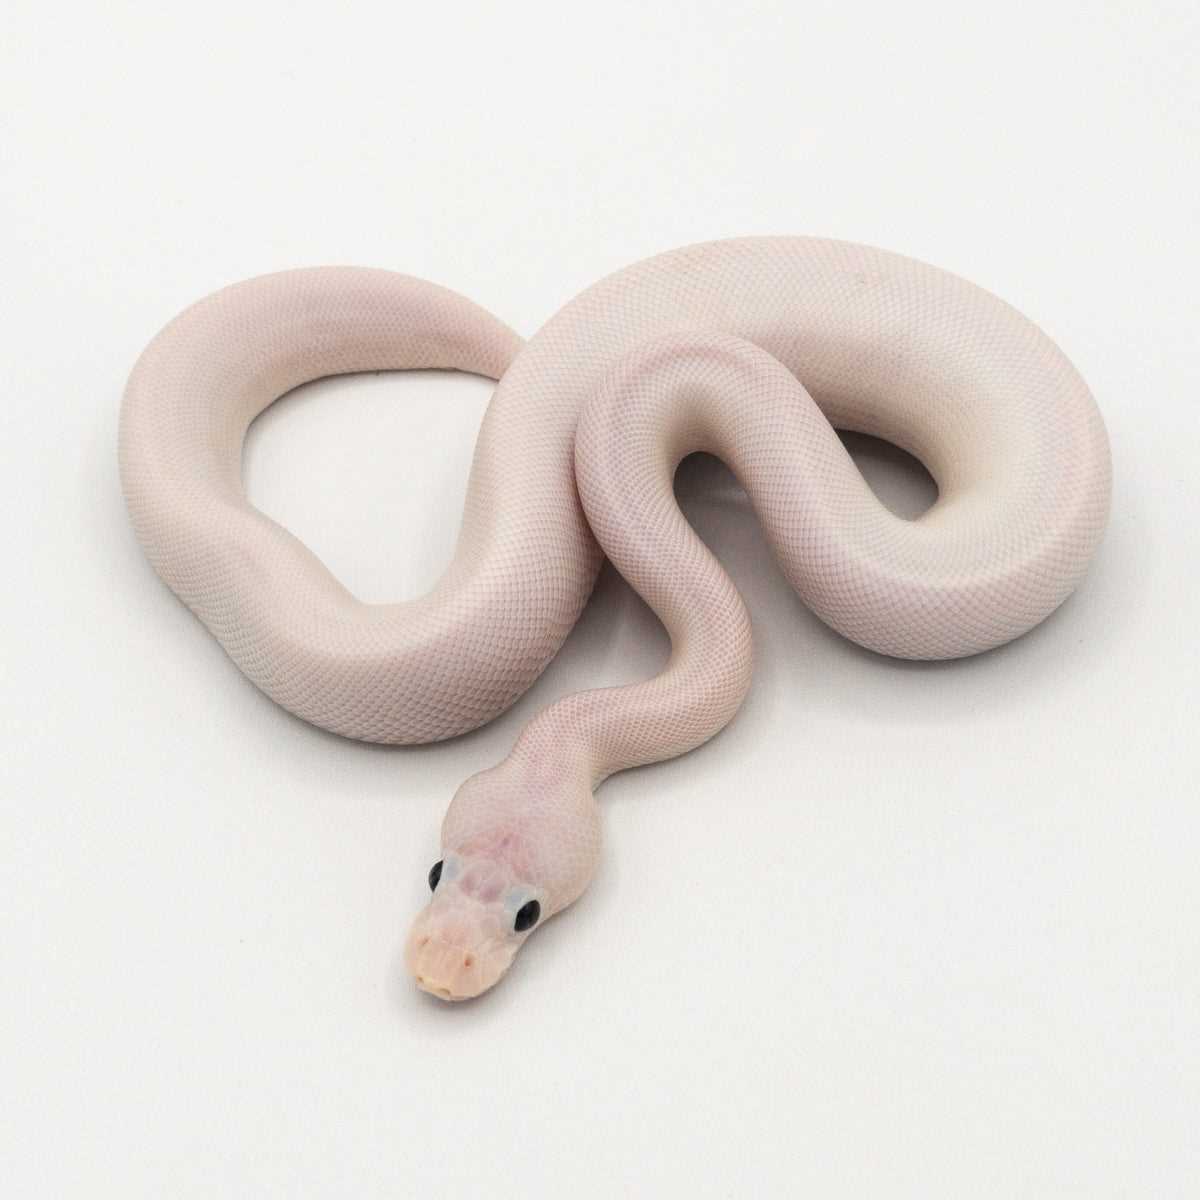 Black Eyed Lucy Ball Python: An Uncommon Variant